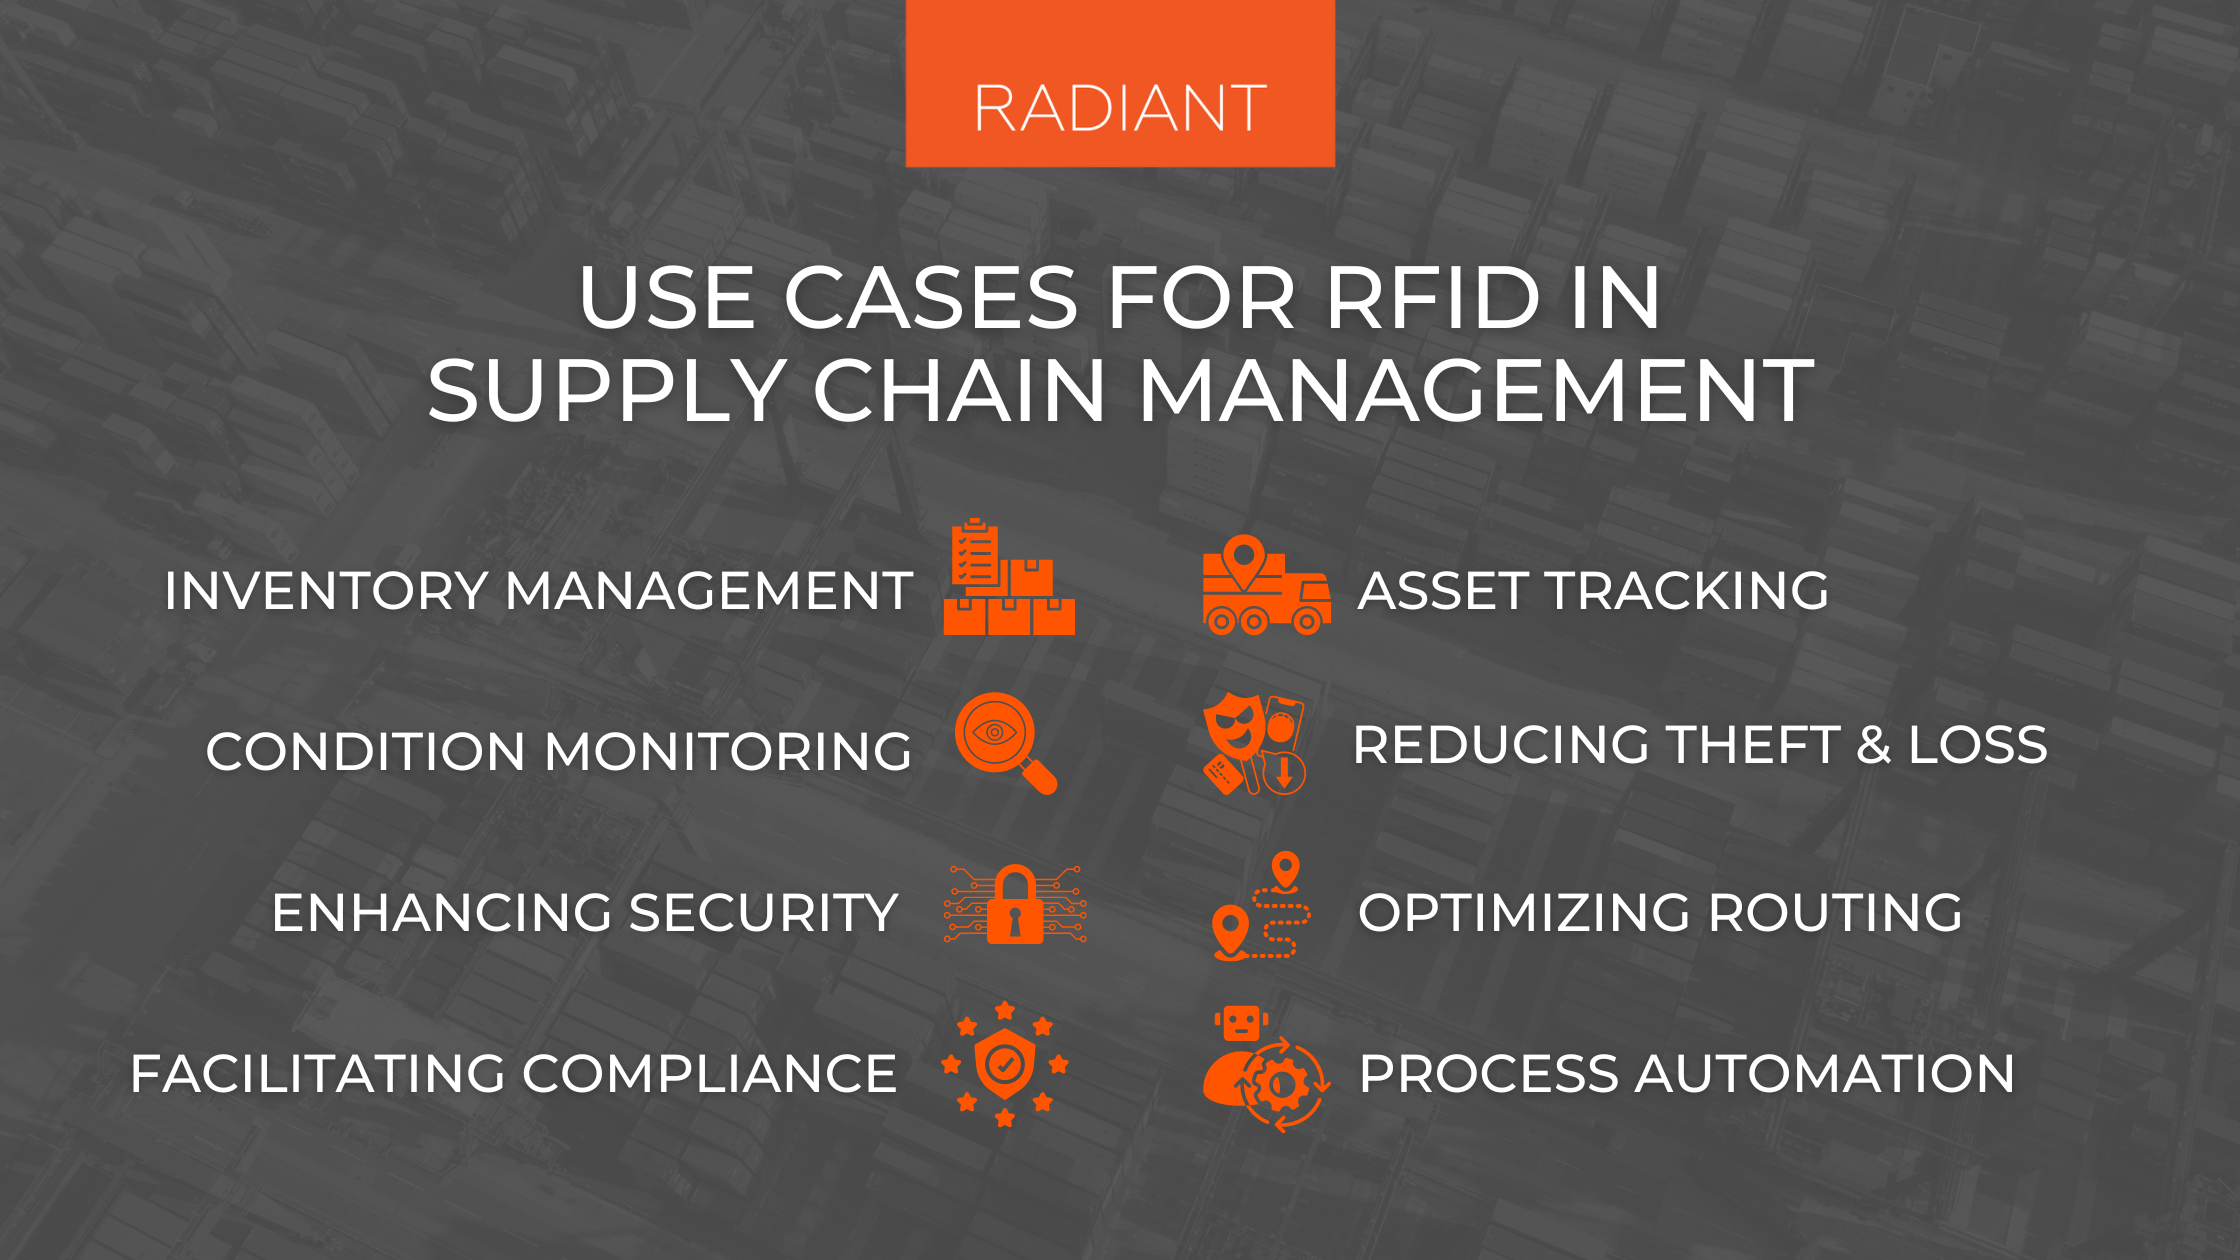 What Is RFID In Supply Chain Management - Benefits Of RFID In Supply Chain Management - RFID Technology In Supply Chain Management - RFID Supply Chain Solutions - RFID In The Supply Chain - RFID In Supply Chain - RFID In Supply Chain Management - RFID Supply Chain - RFID Supply Chain Management